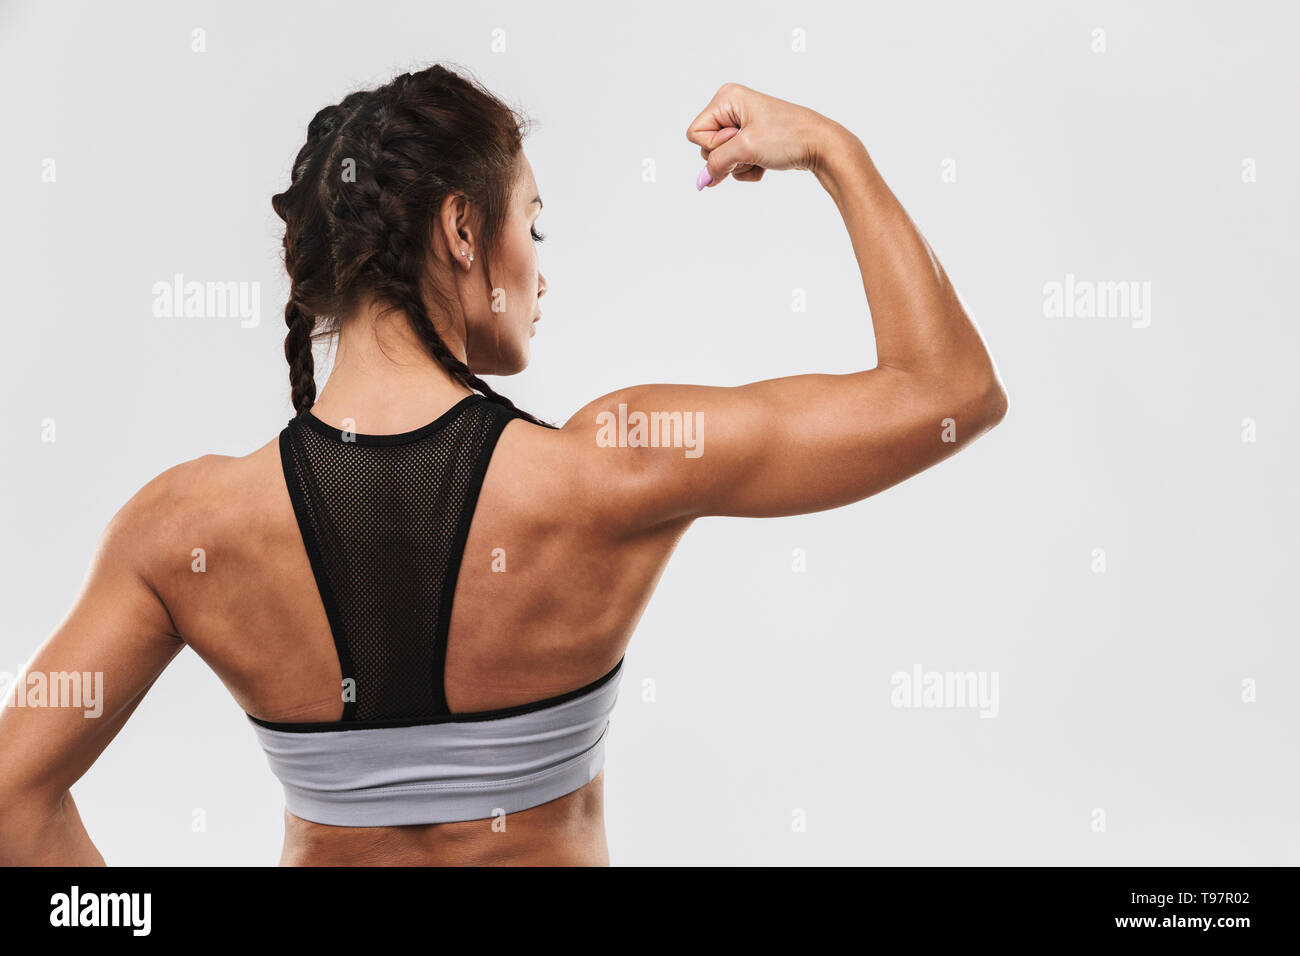 Back view image of a beautiful young amazing strong sports fitness